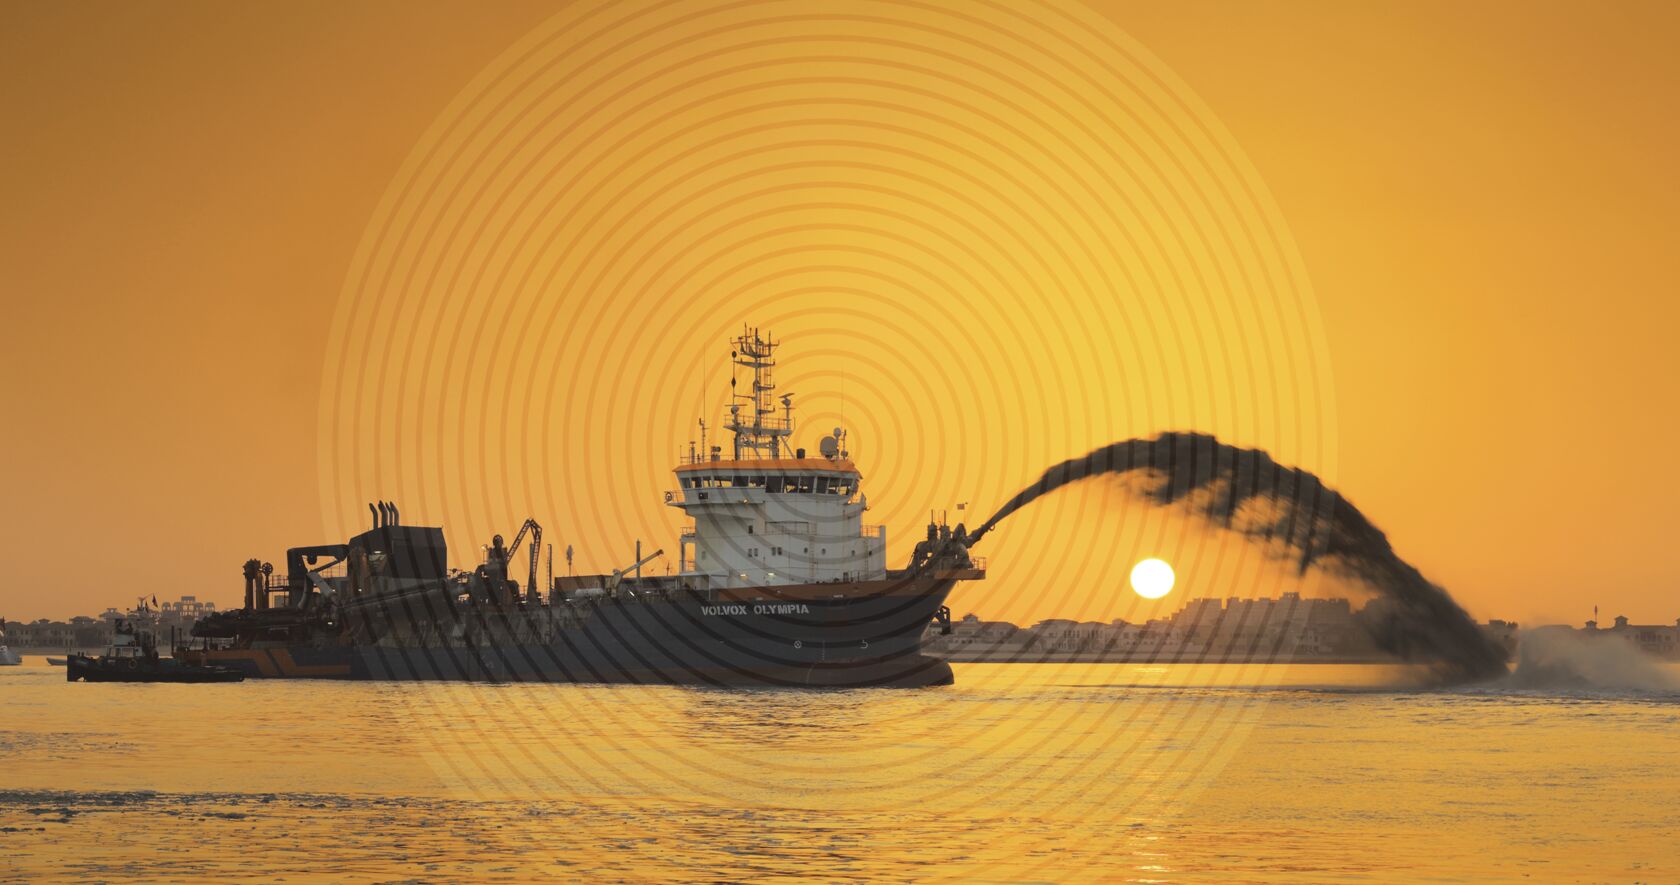 Dredging vessel working in the ocean at sunset with a white circle overlay on top of the vessel.  